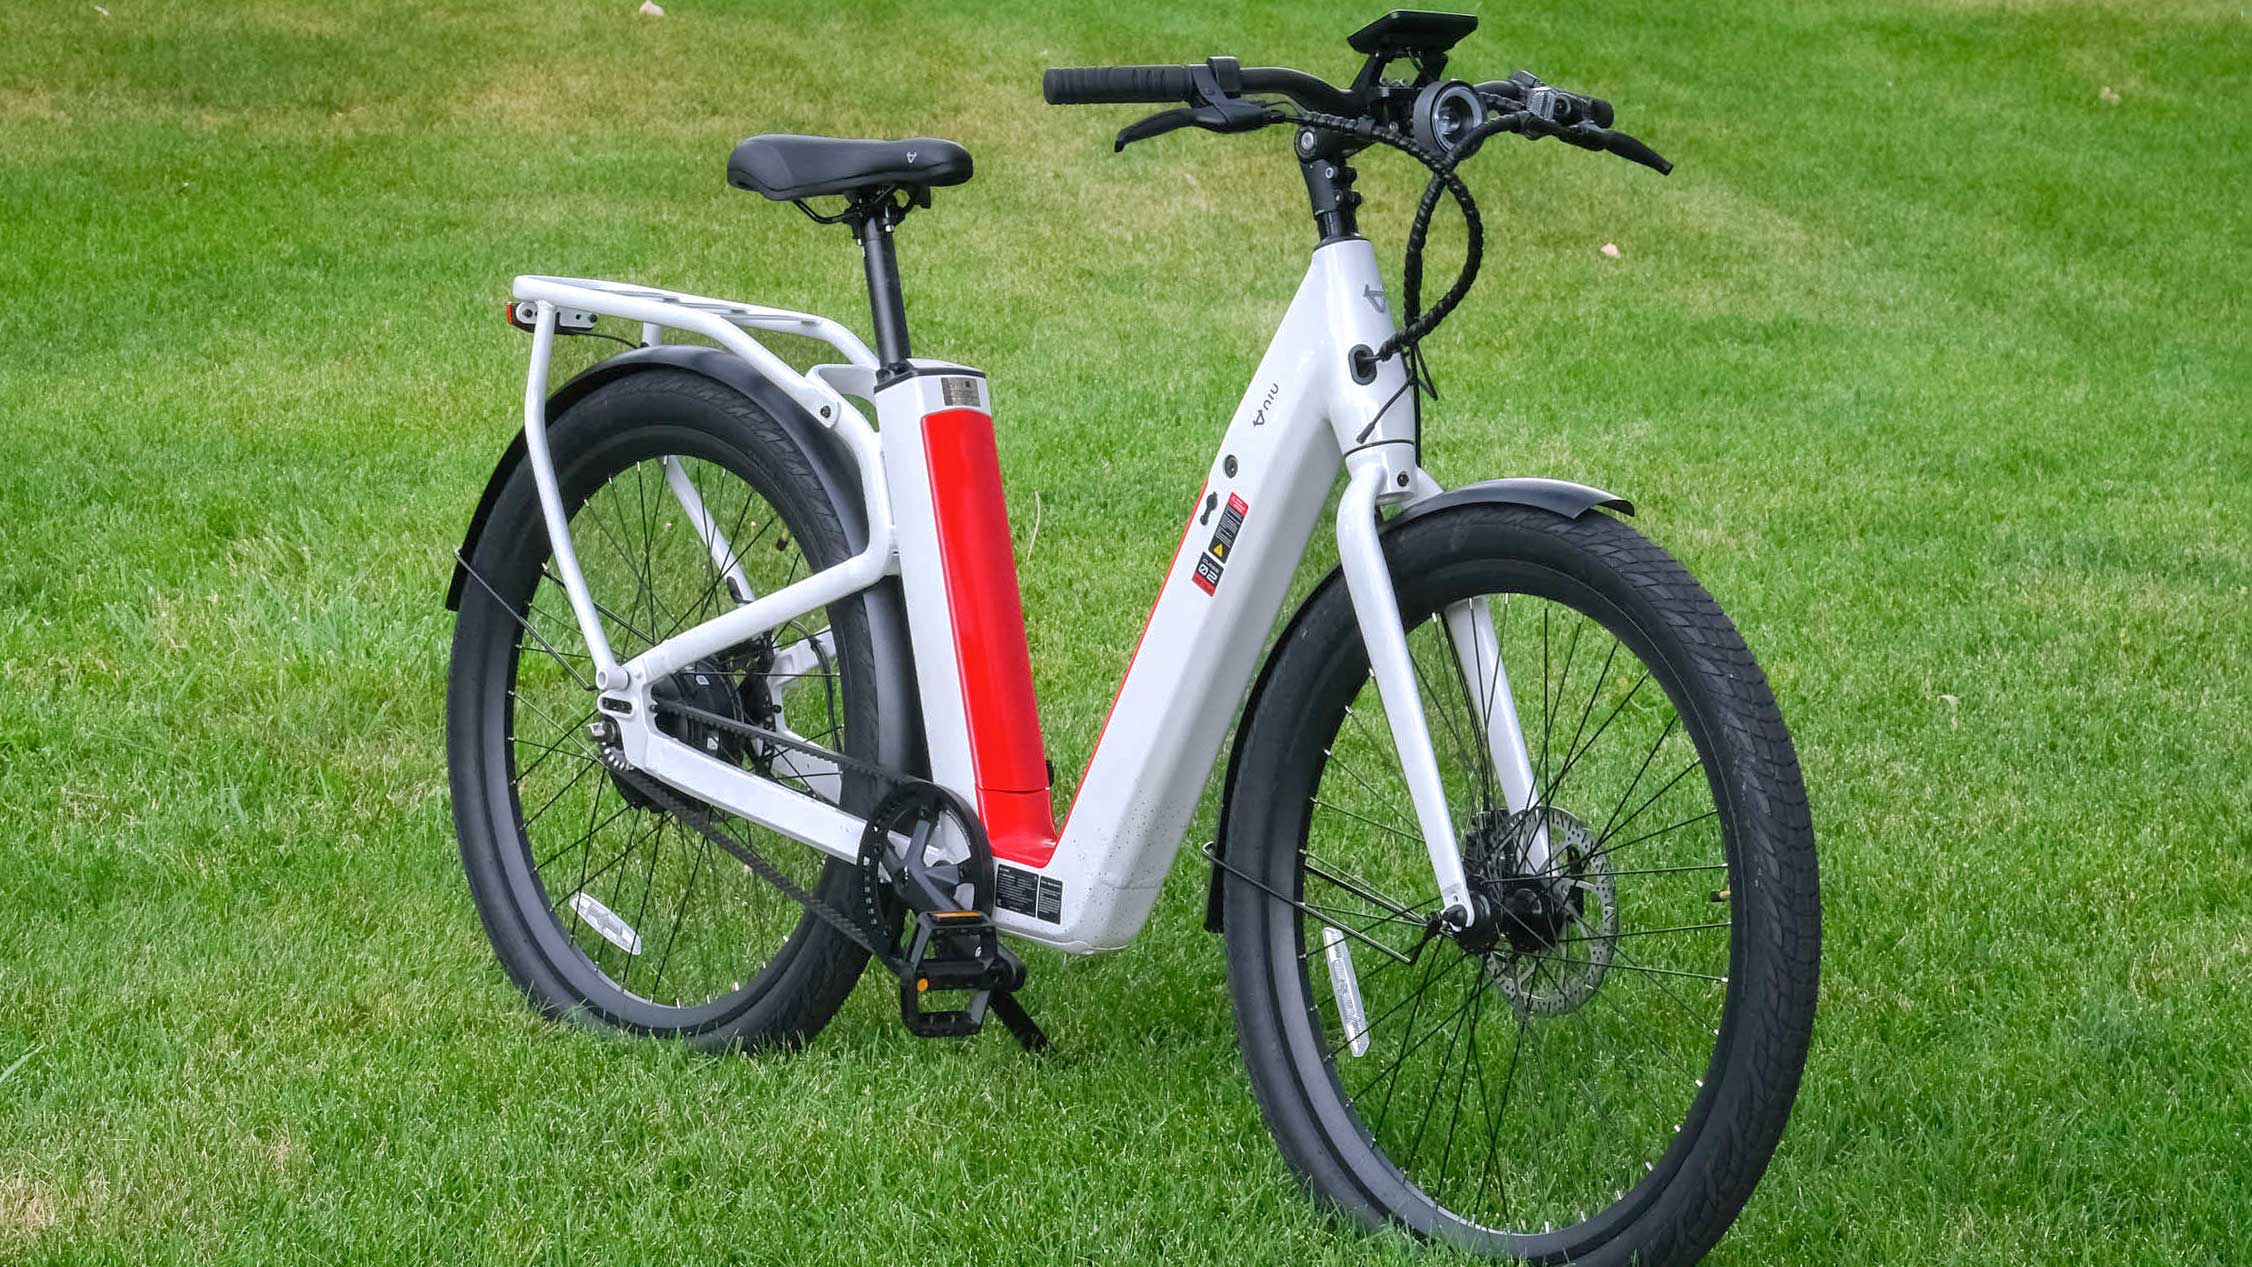 I review ebikes for a living — these are my three favorite ebikes for